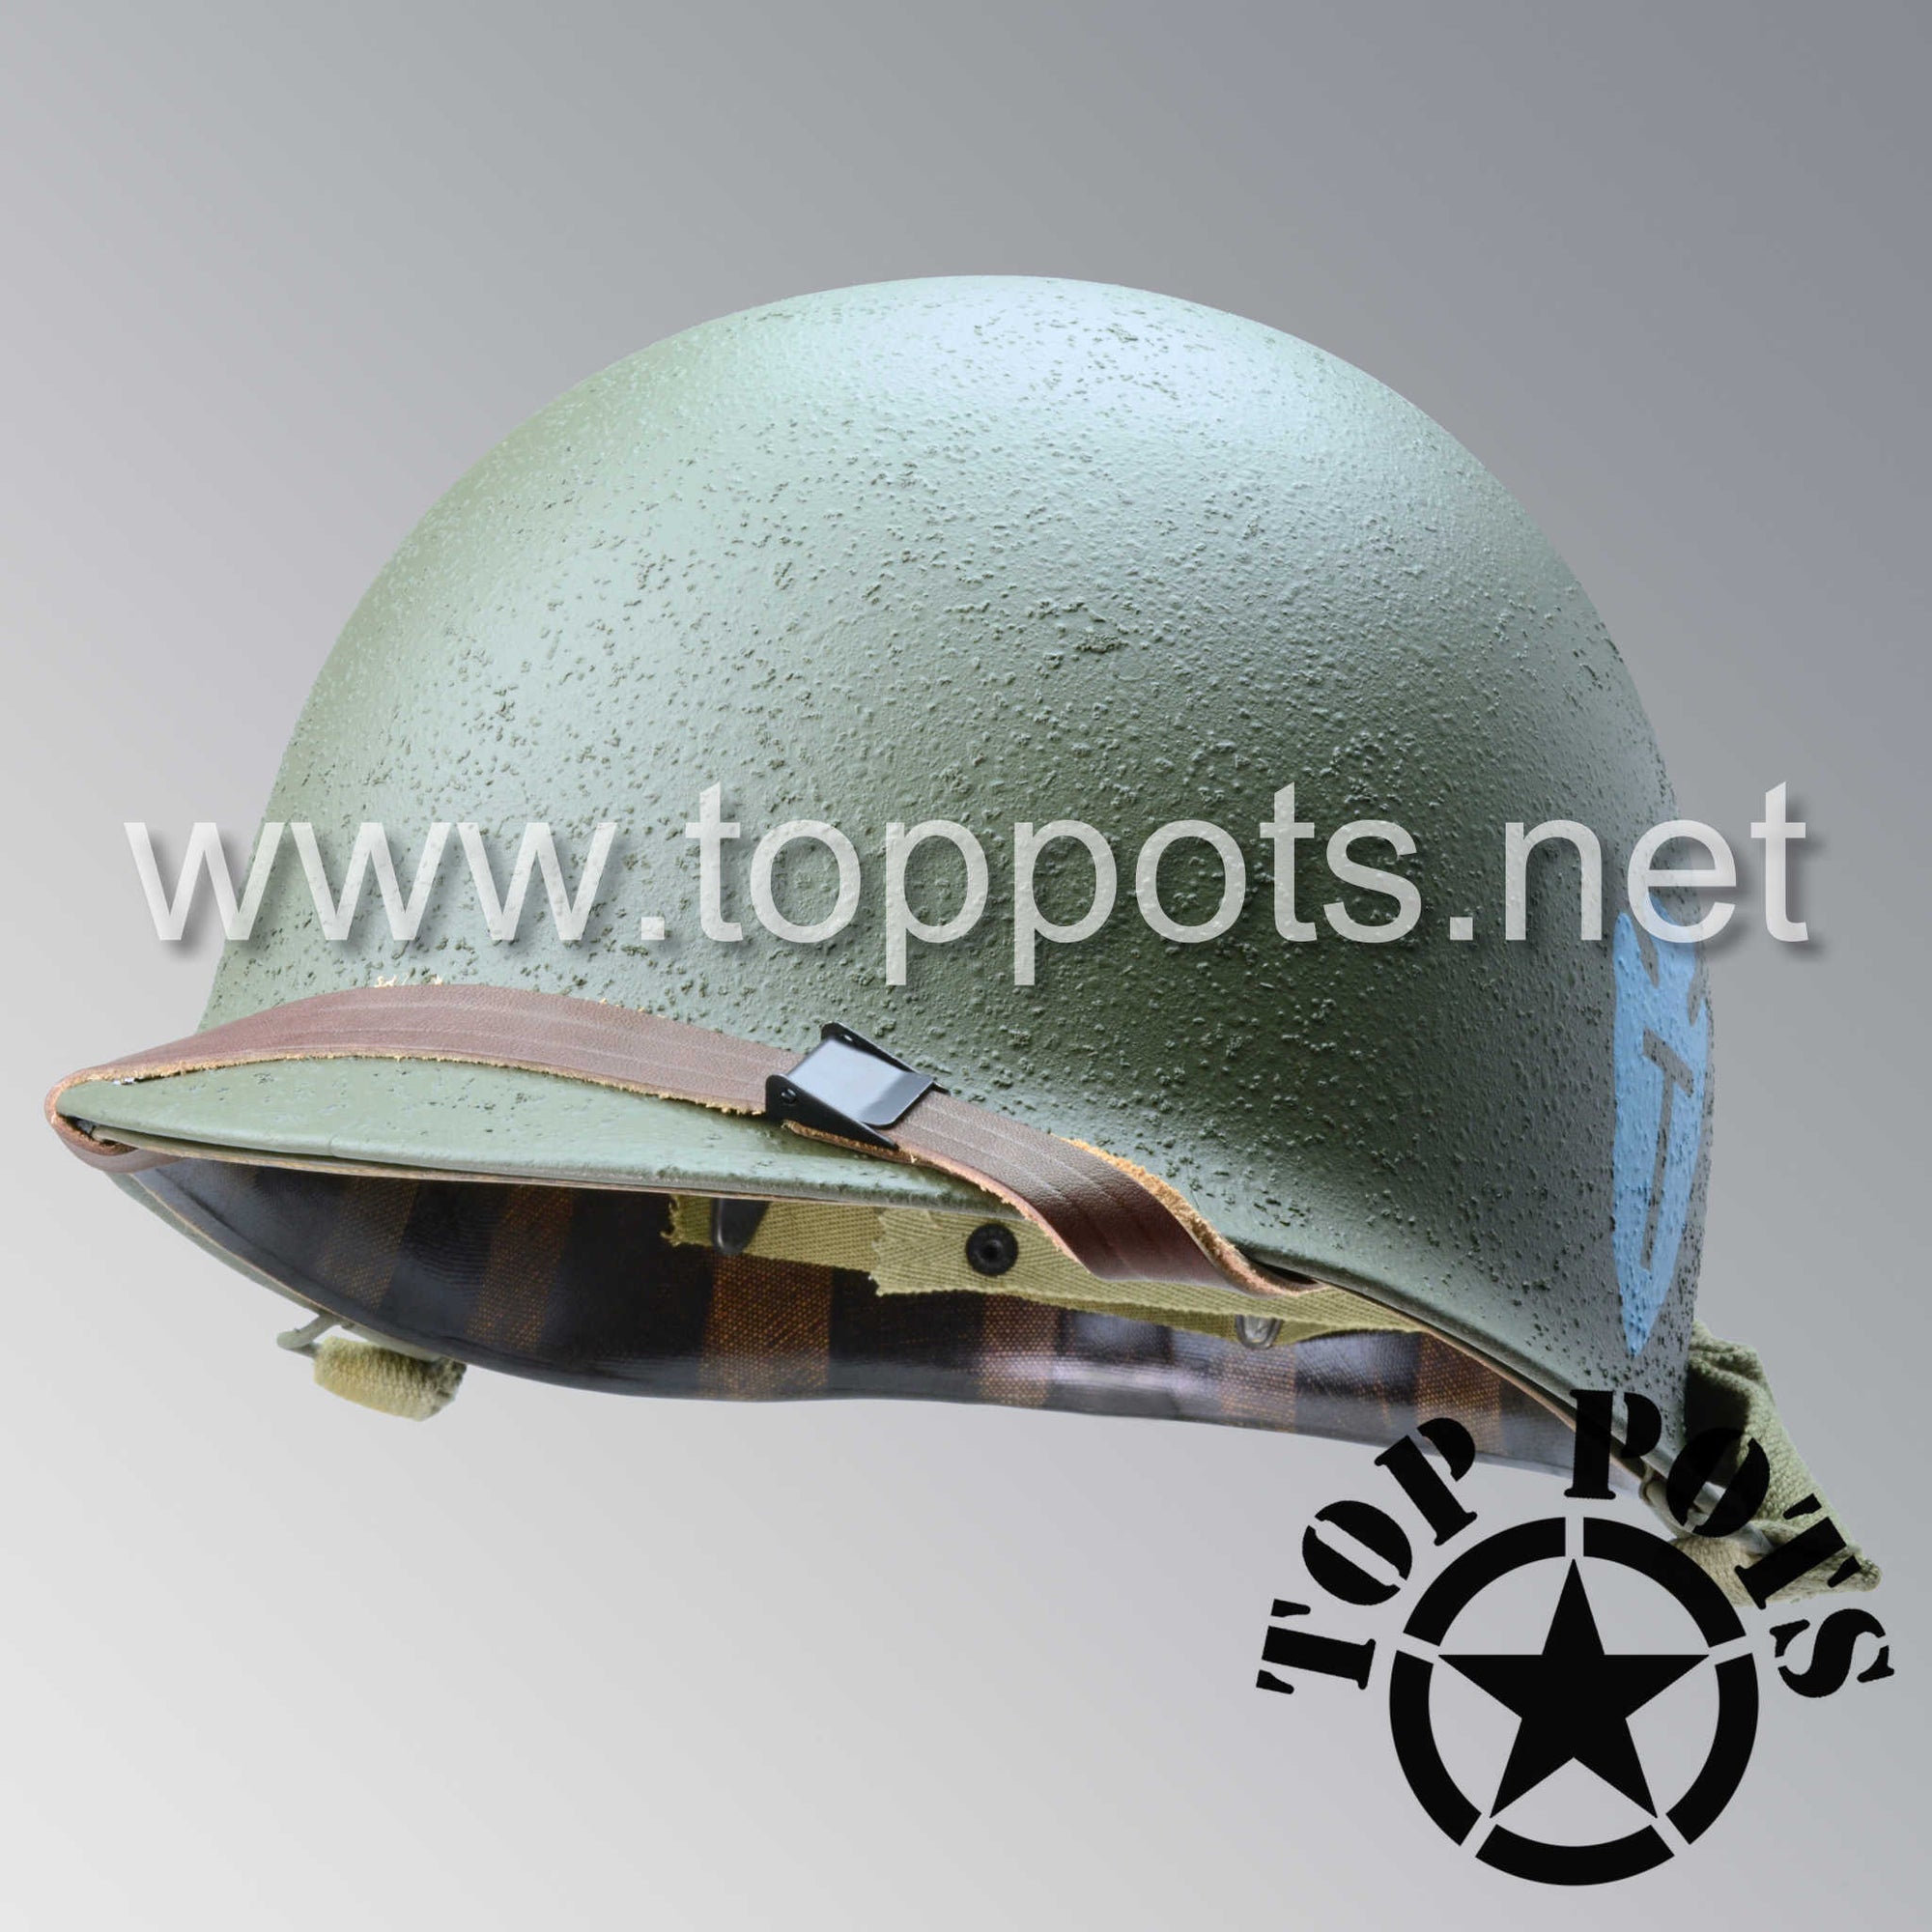 WWII US Army Restored Original M1 Infantry Helmet Swivel Bale Shell and Liner with 36th Infantry Division Emblem